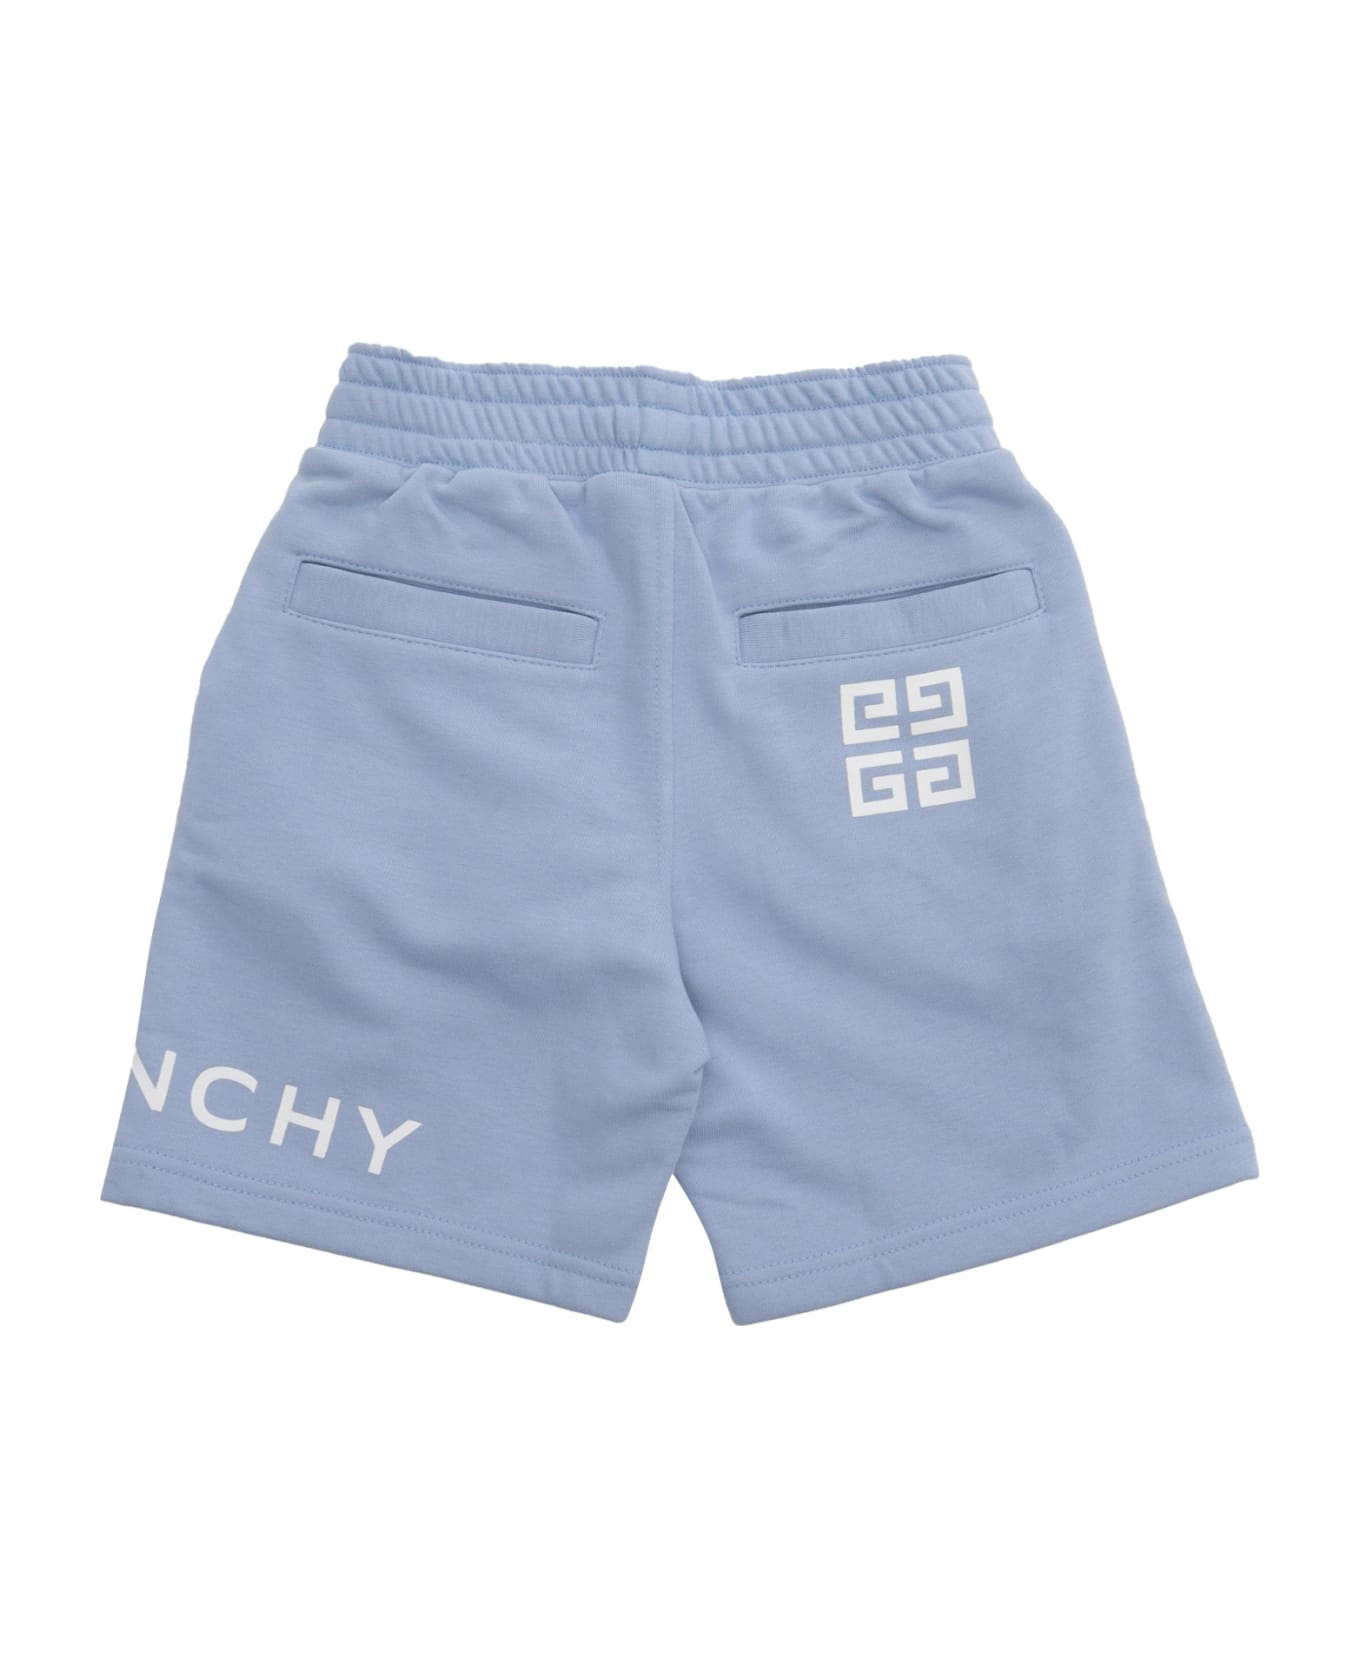 Givenchy Terry Shorts - BLUE ボトムス